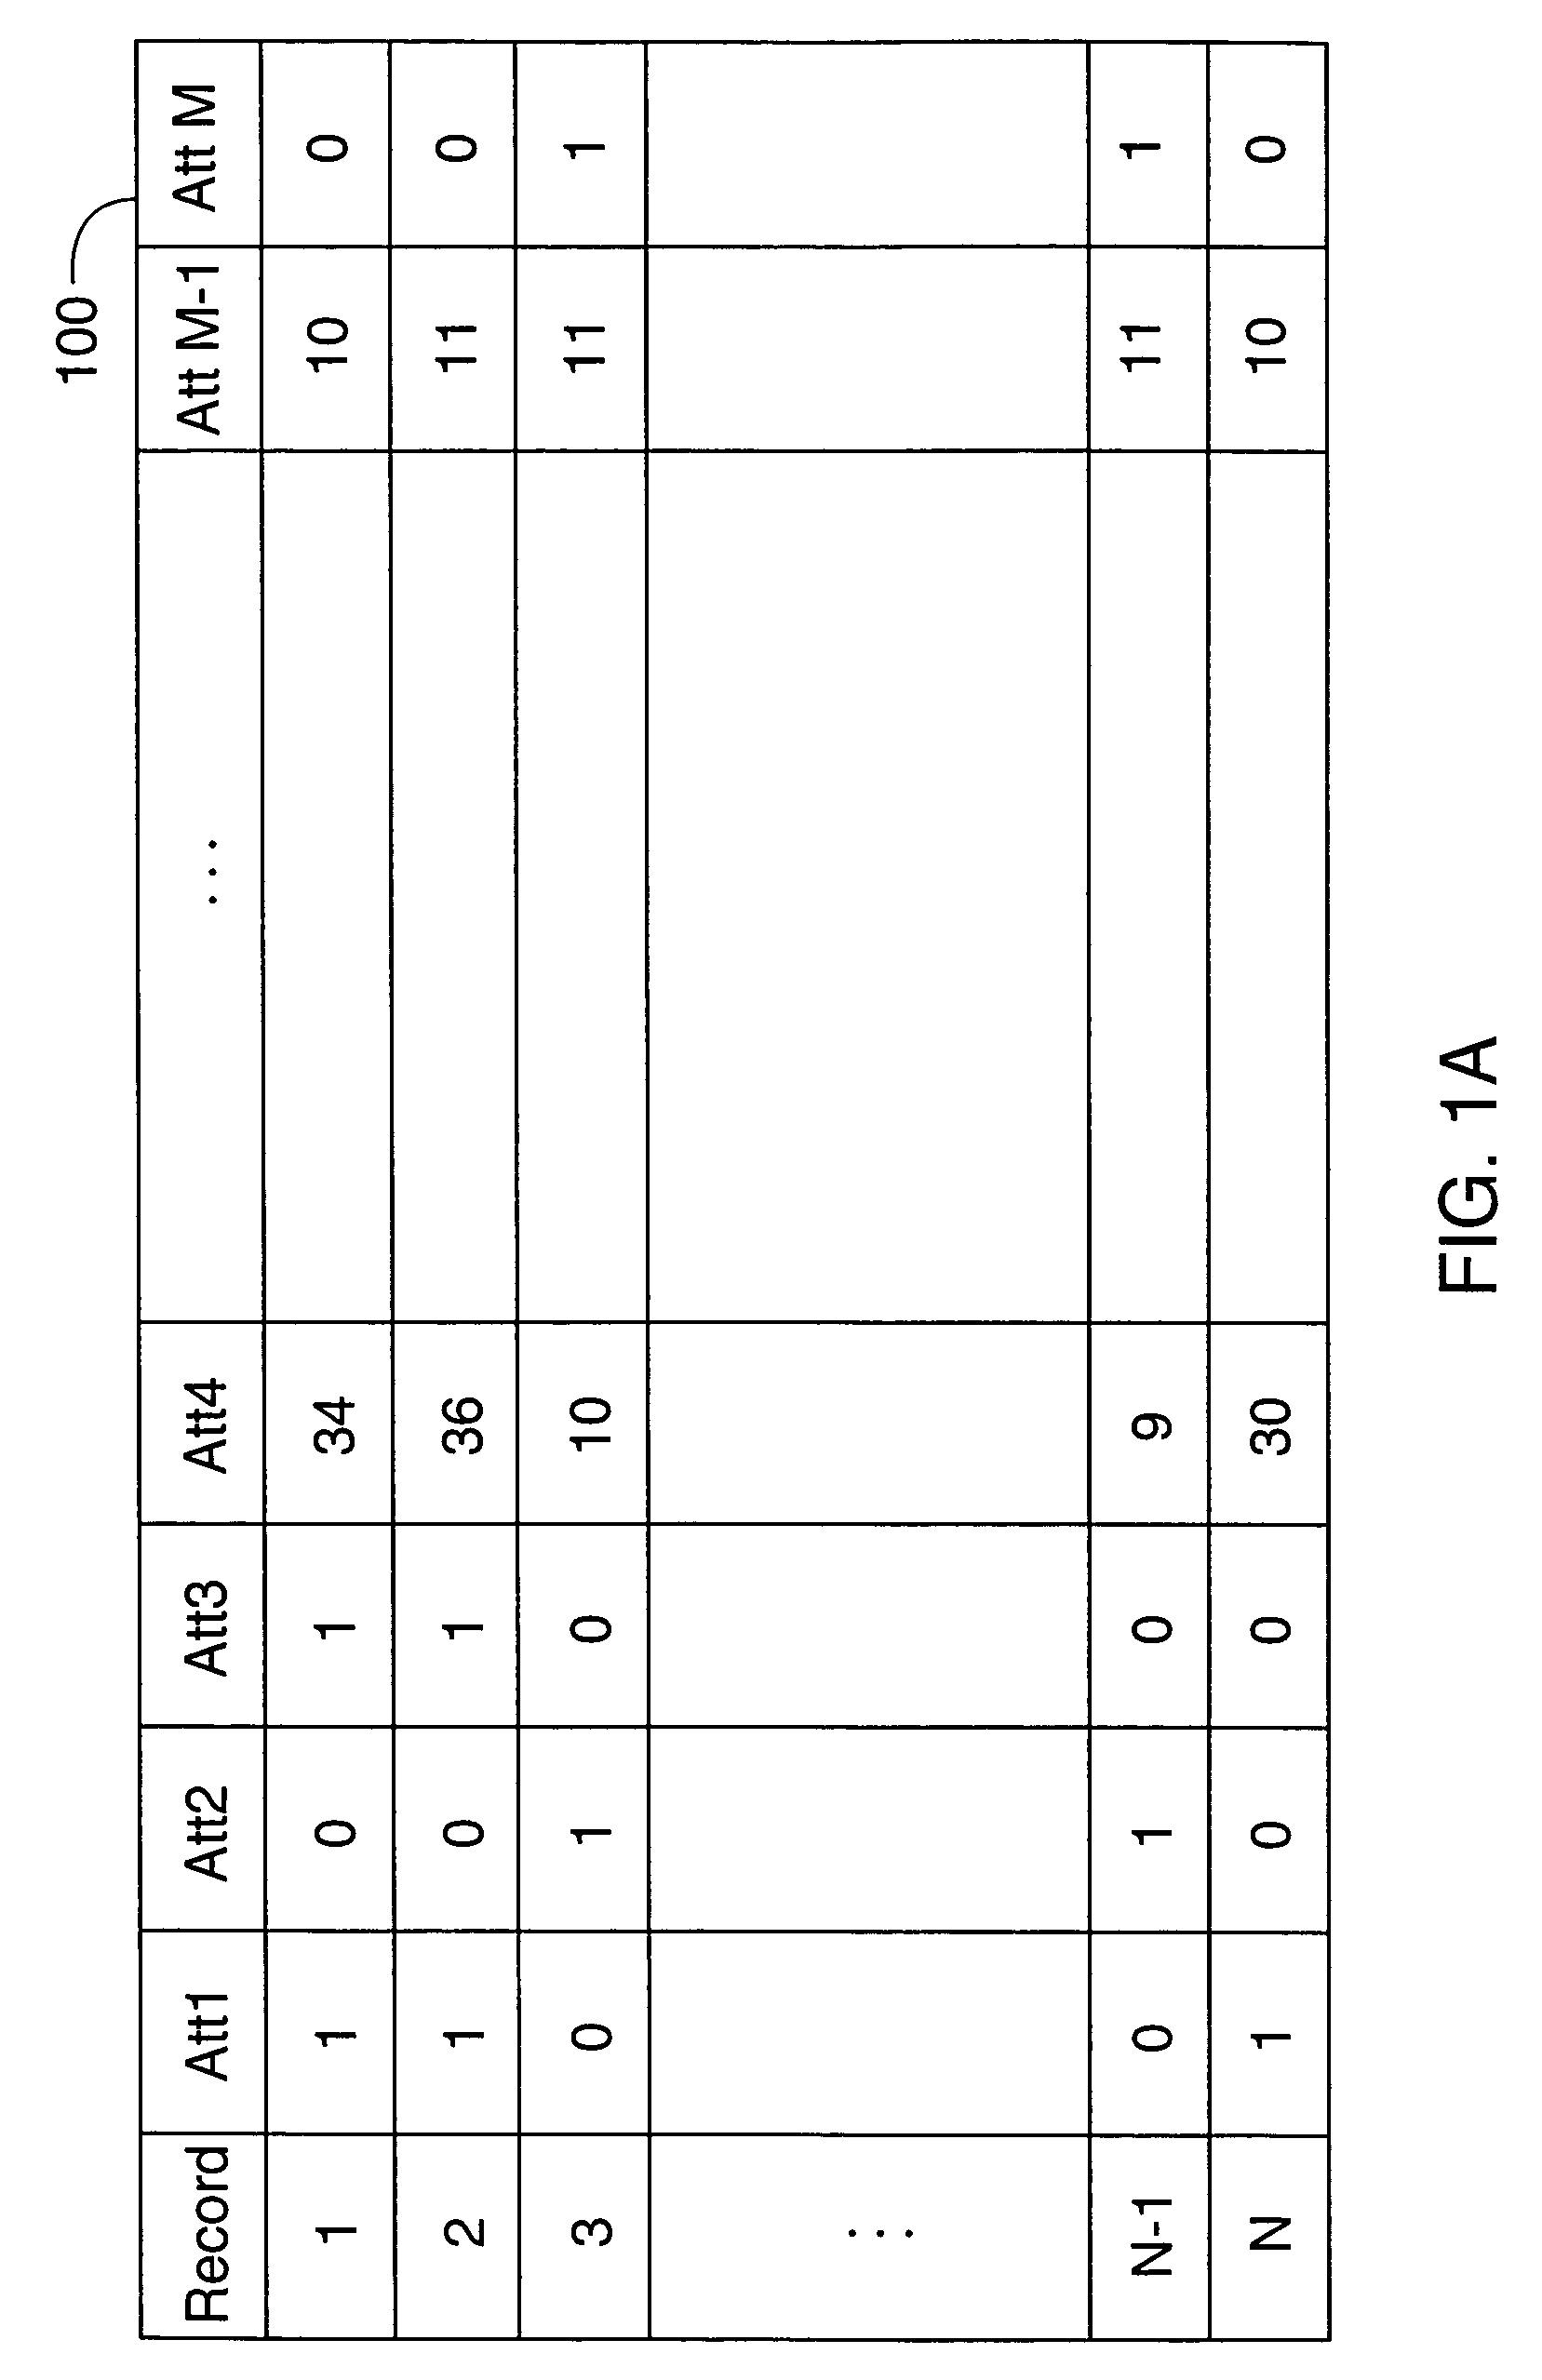 Apparatus and accompanying methods for visualizing clusters of data and hierarchical cluster classifications